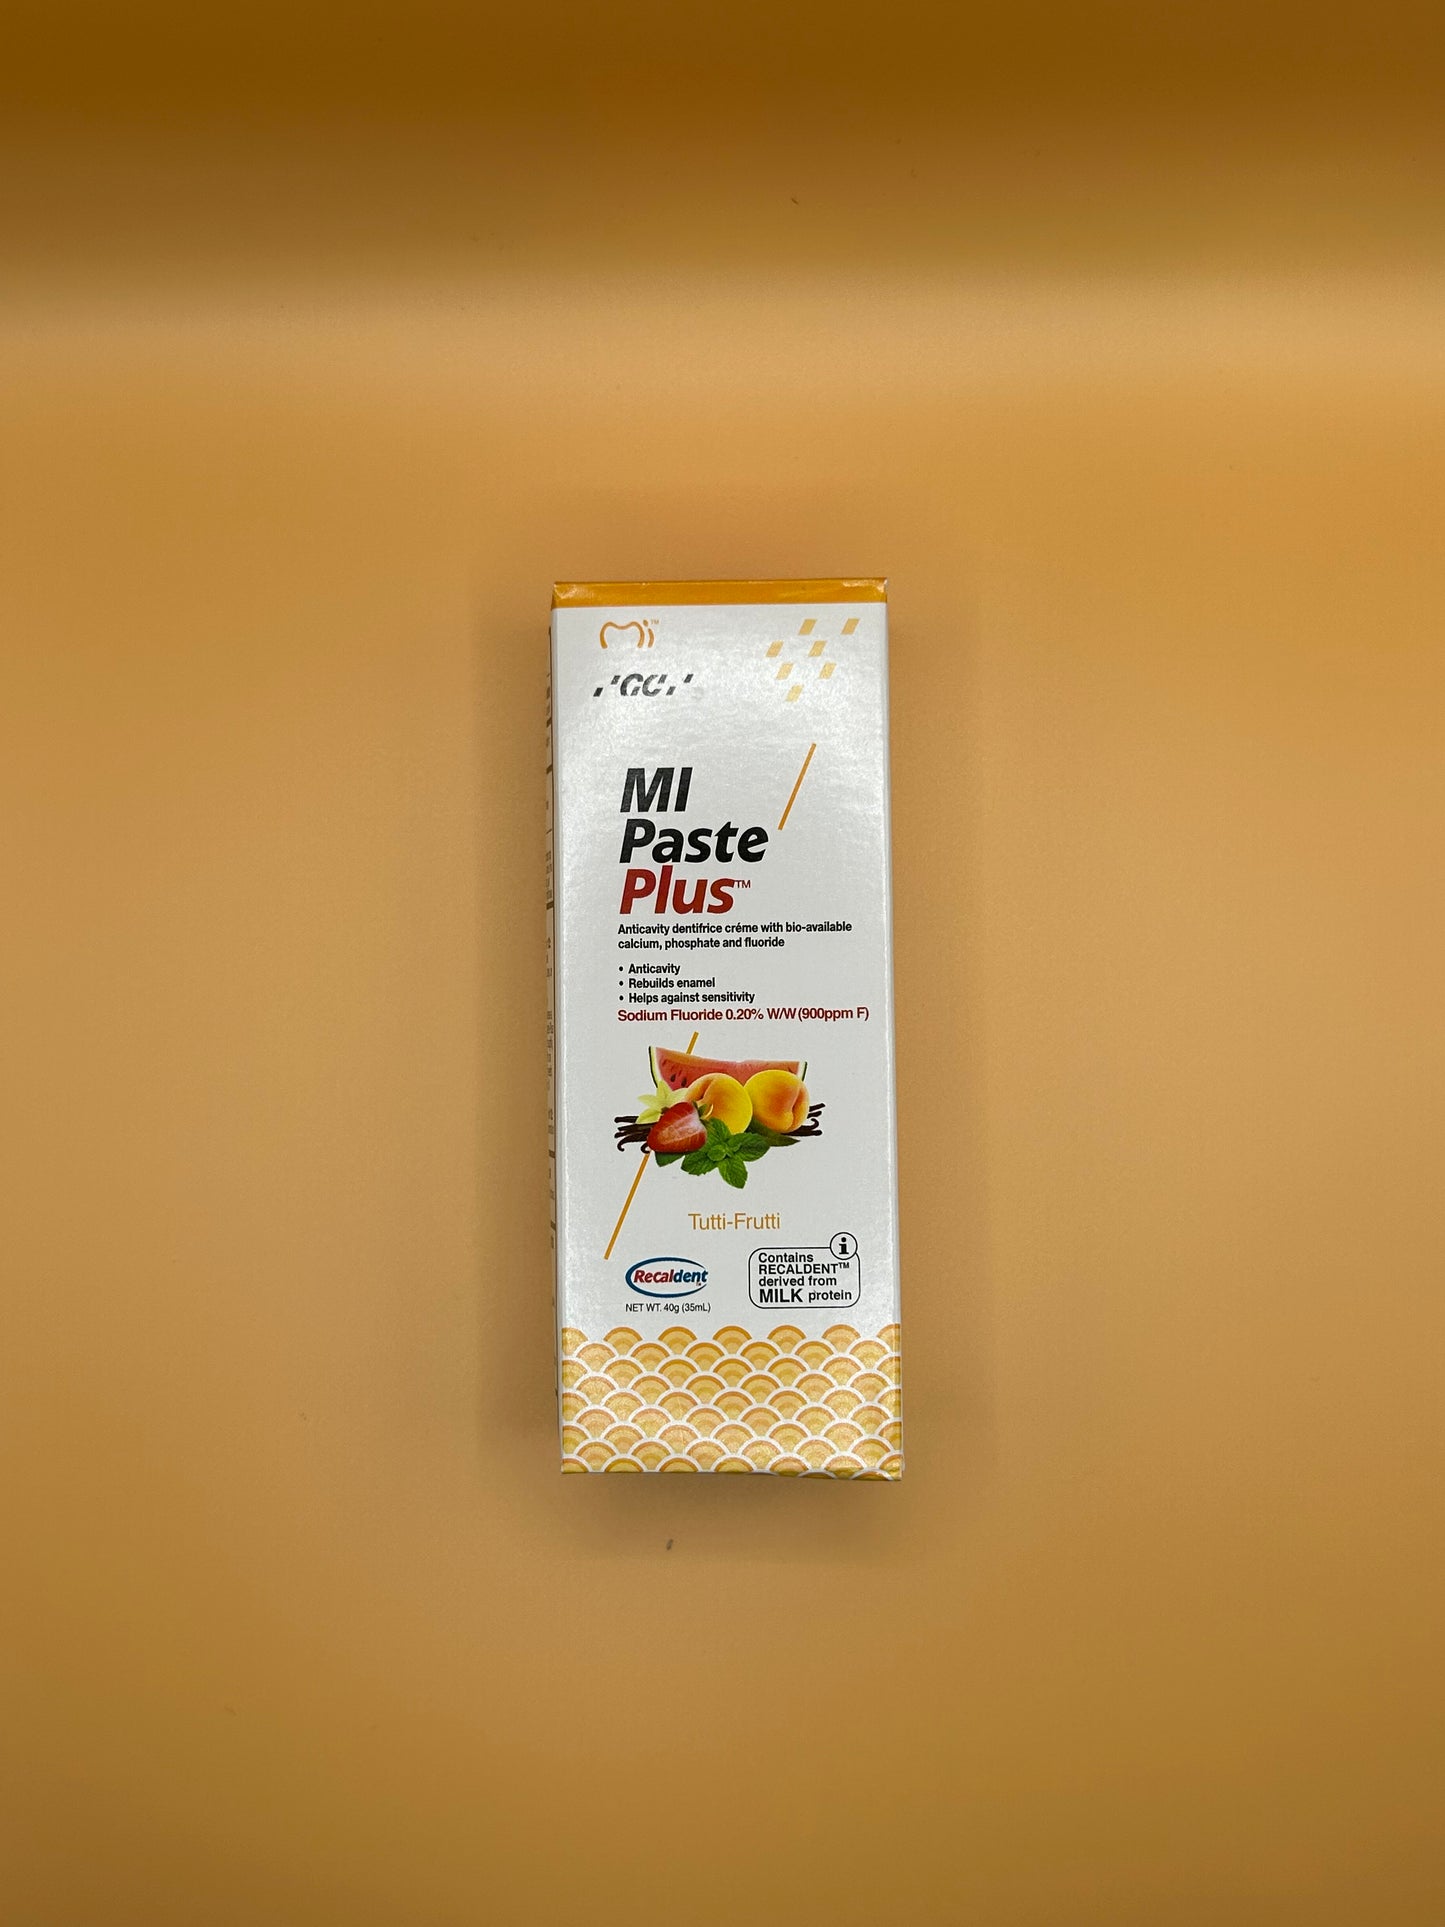 Find Relief from Tooth Sensitivity with MI Paste Plus: A Comprehensive Guide